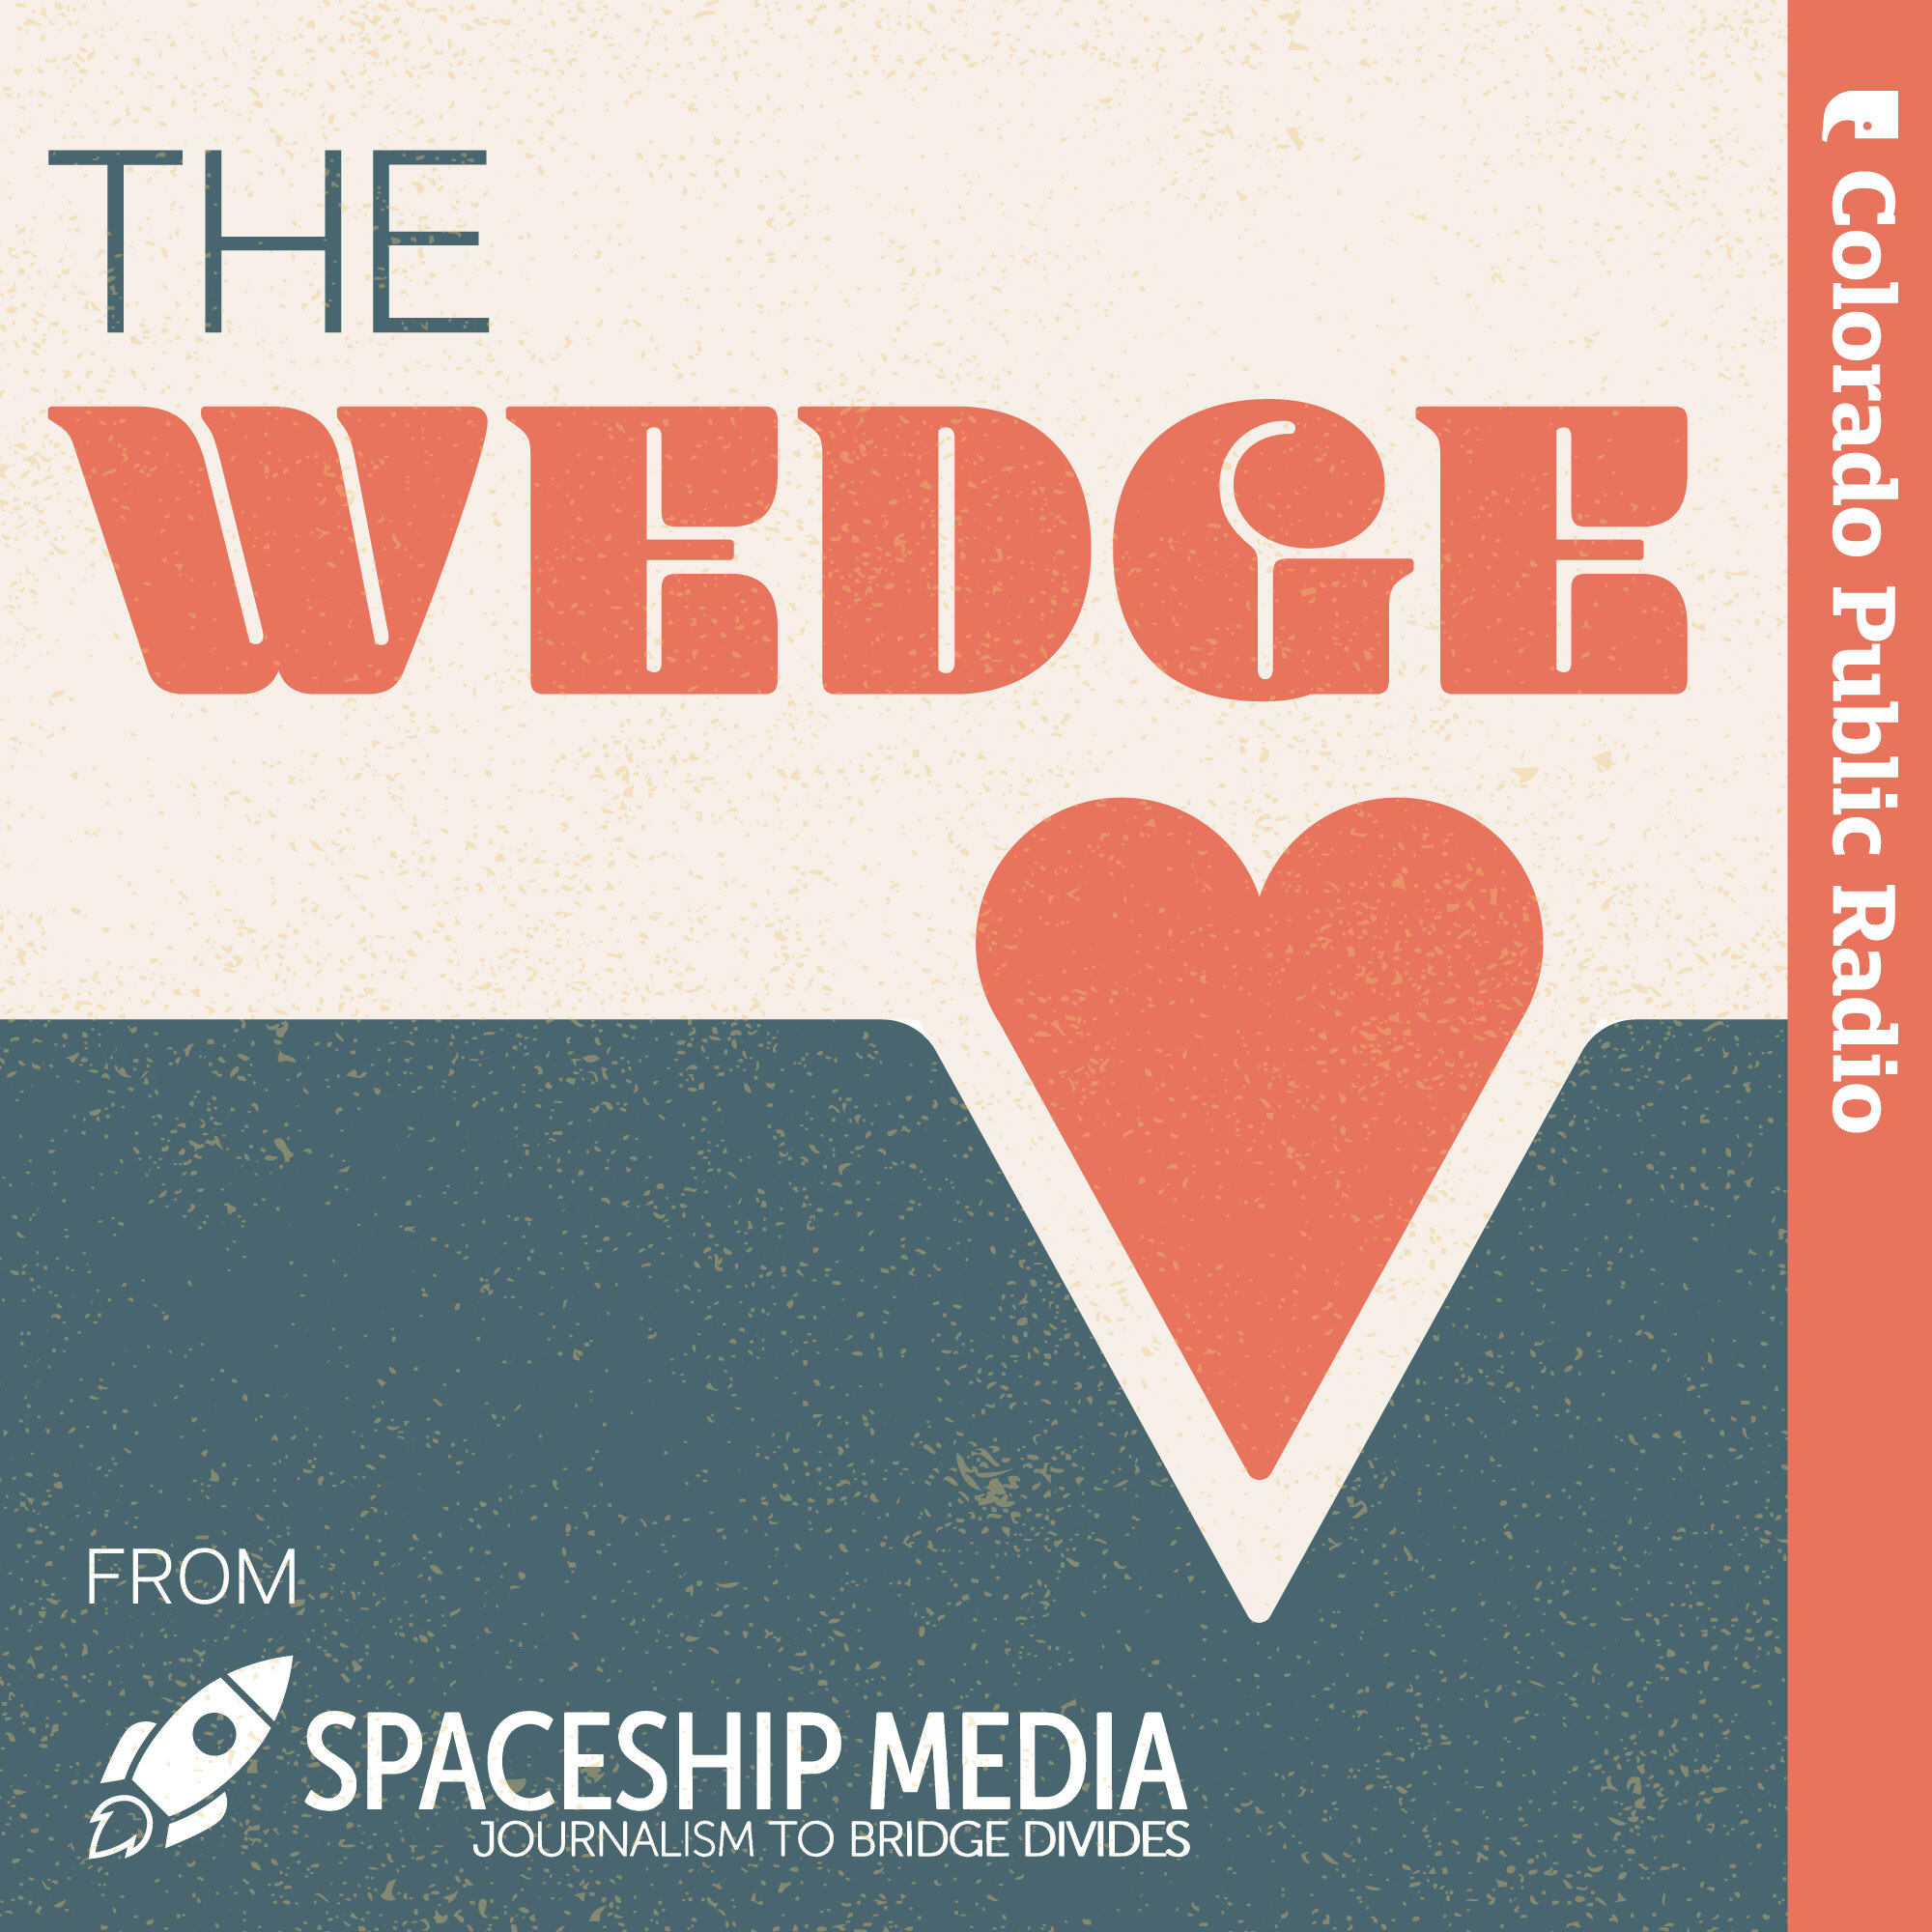 The Wedge podcast logo